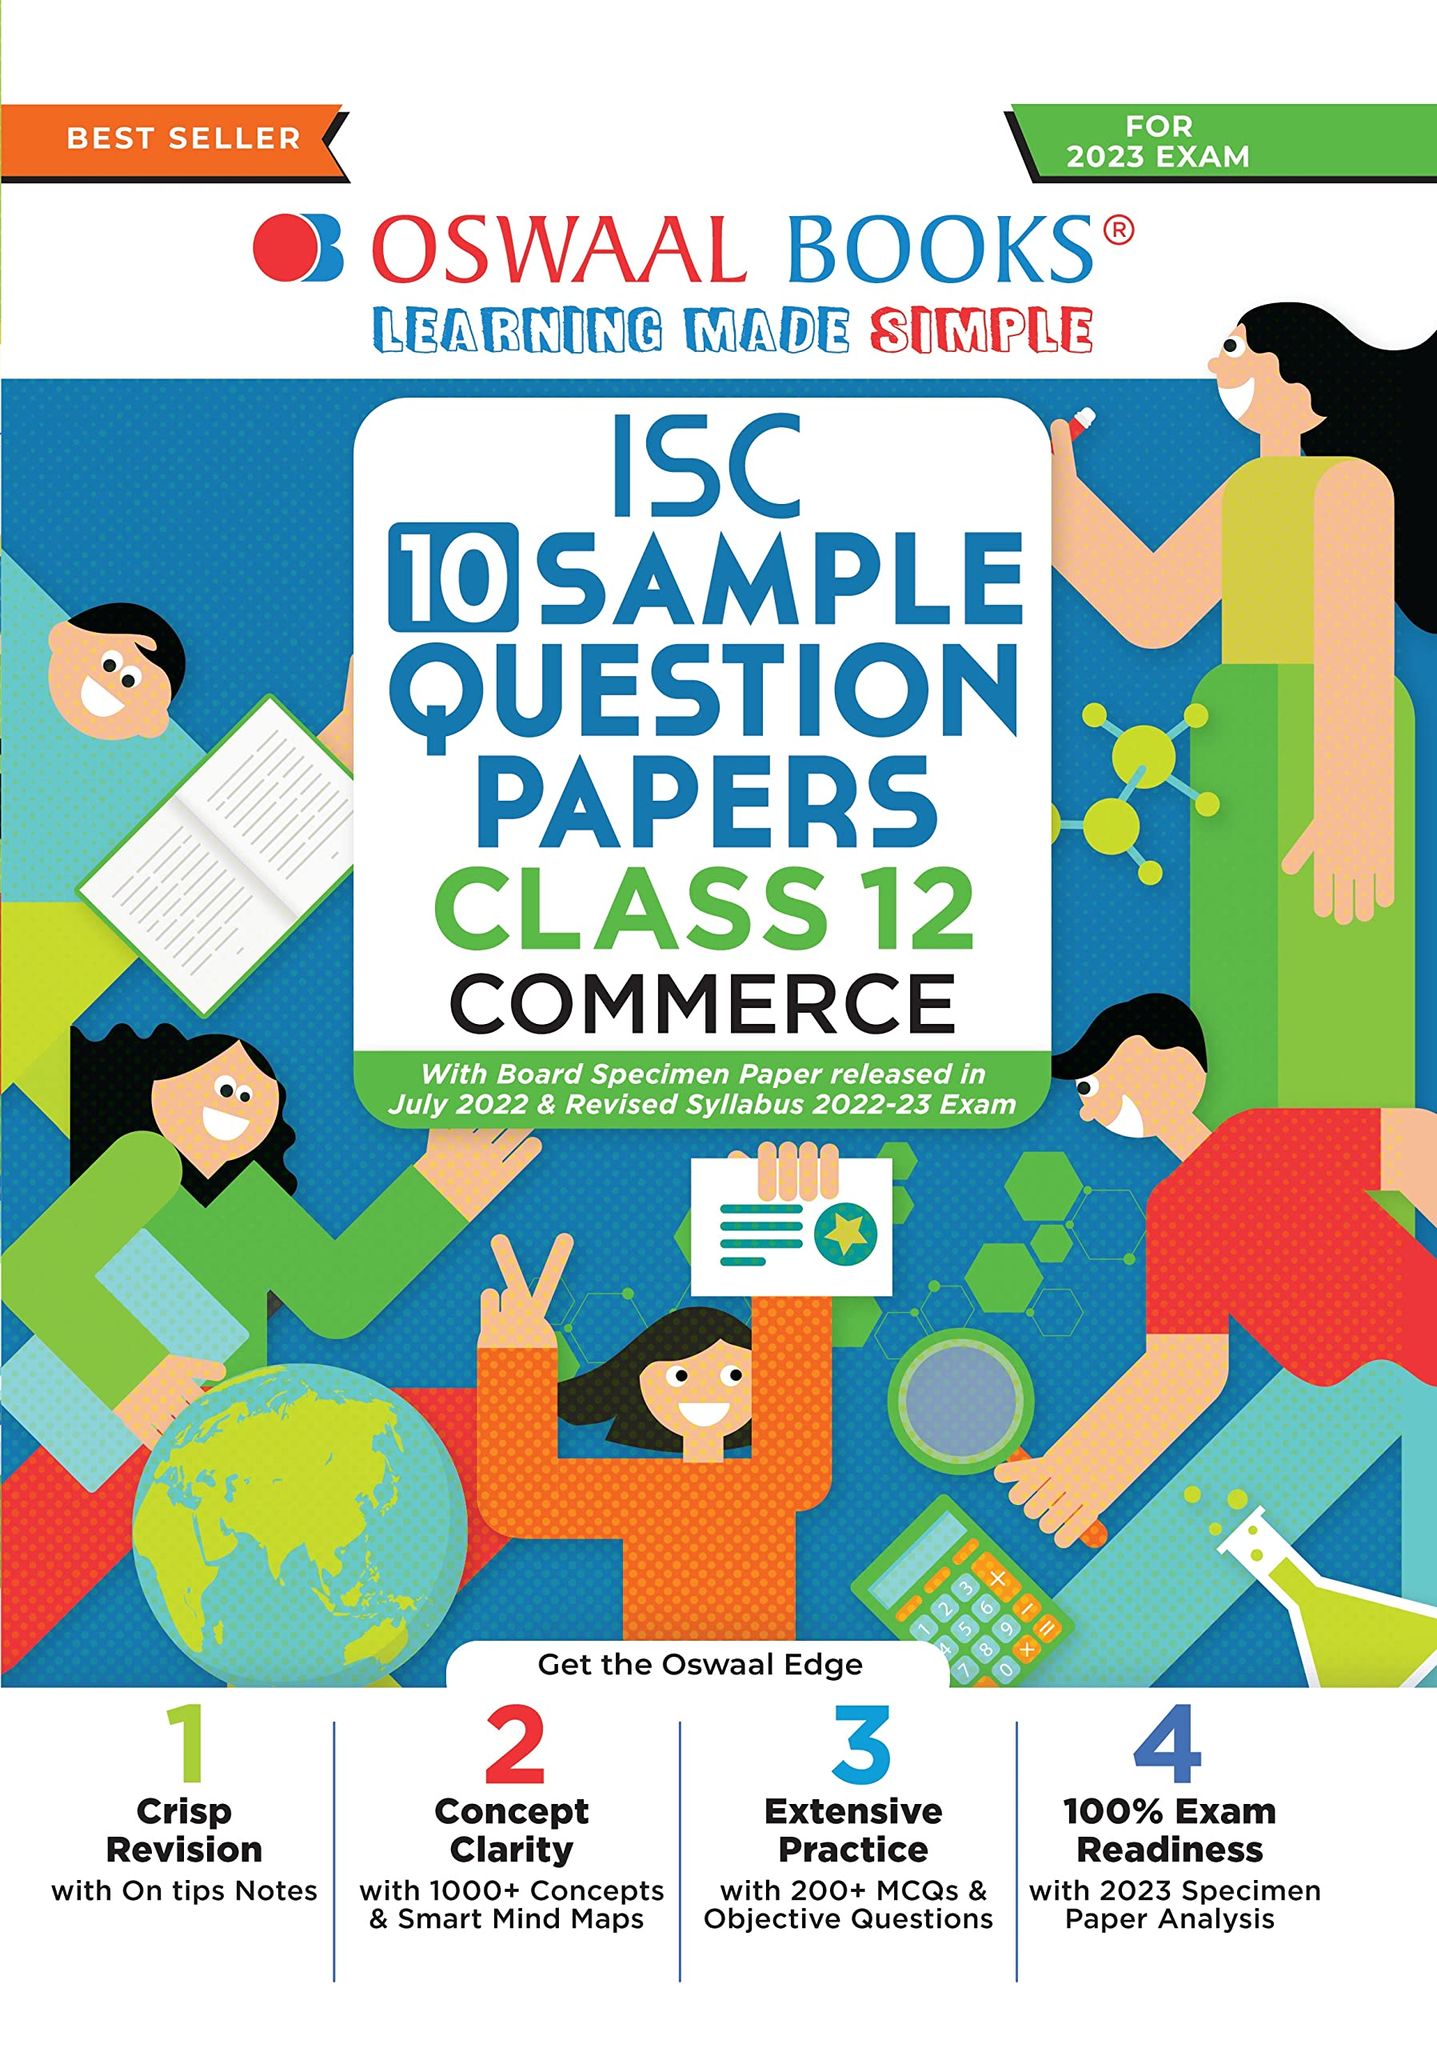 Oswaal ISC Sample Question Papers Class 12 Commerce Hardcover for 2023 Board Exam (based on the latest CISCE/ICSE Specimen Paper) [Hardcover] Oswaal Editorial Board